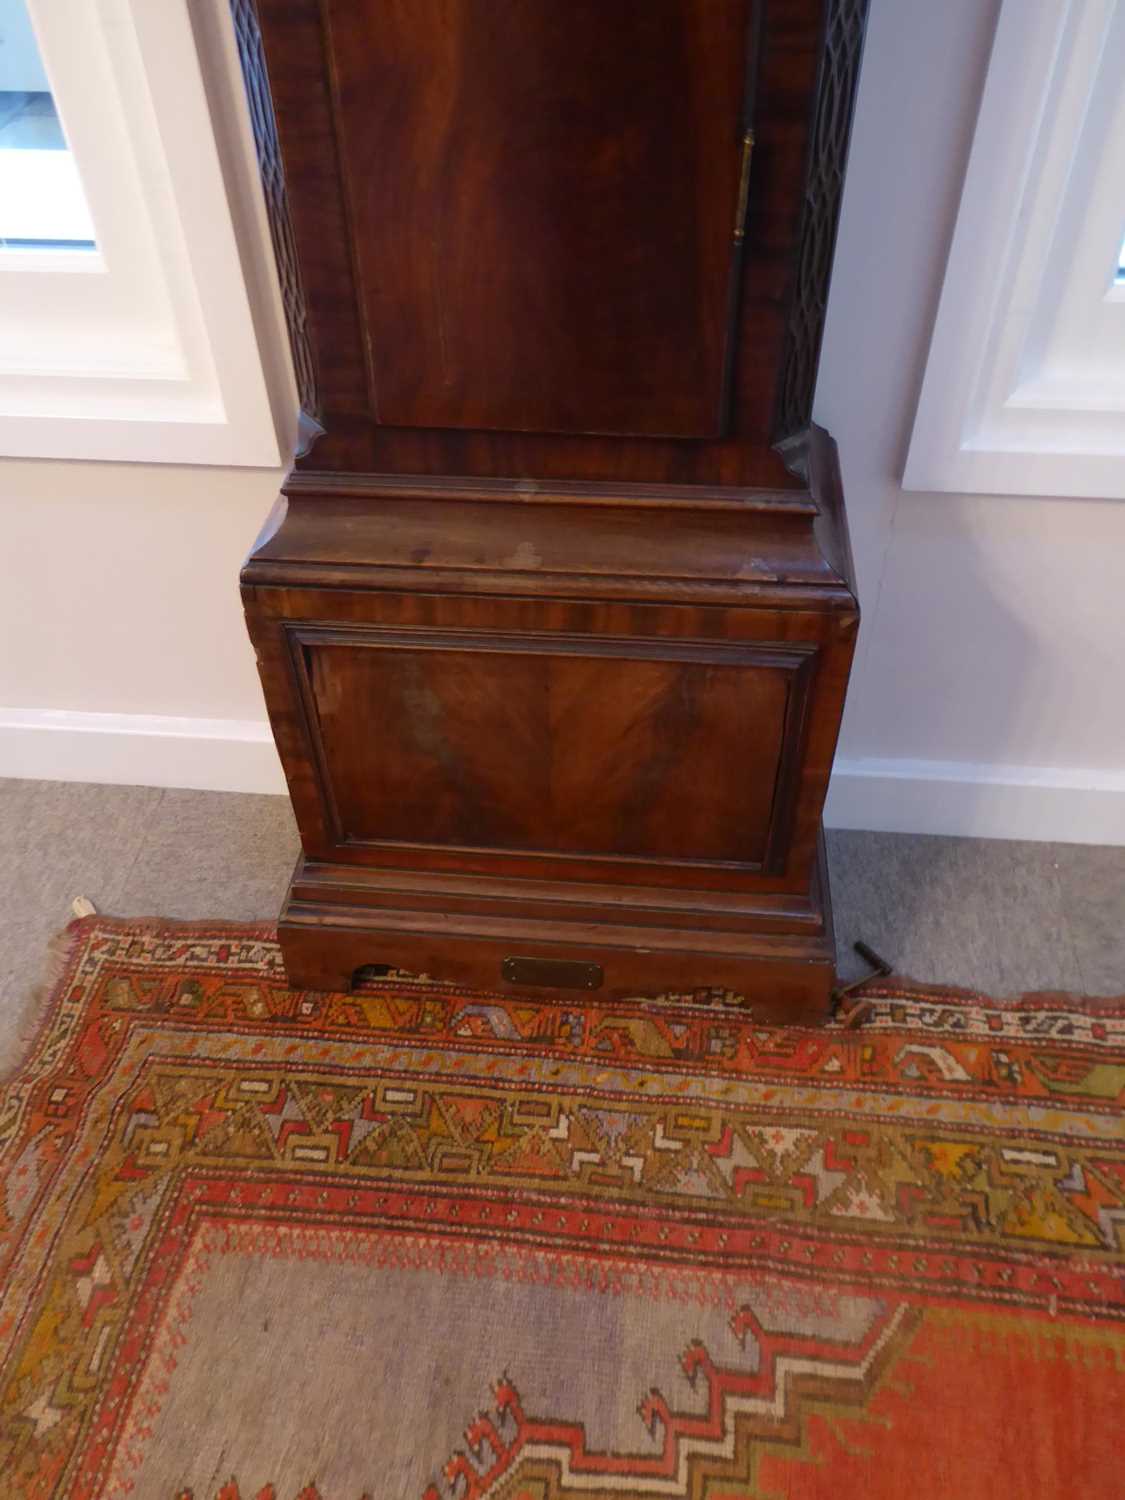 A Mahogany Quarter Chiming Longcase Clock, swan neck pediment, trunk with blind fretwork canted - Image 13 of 15